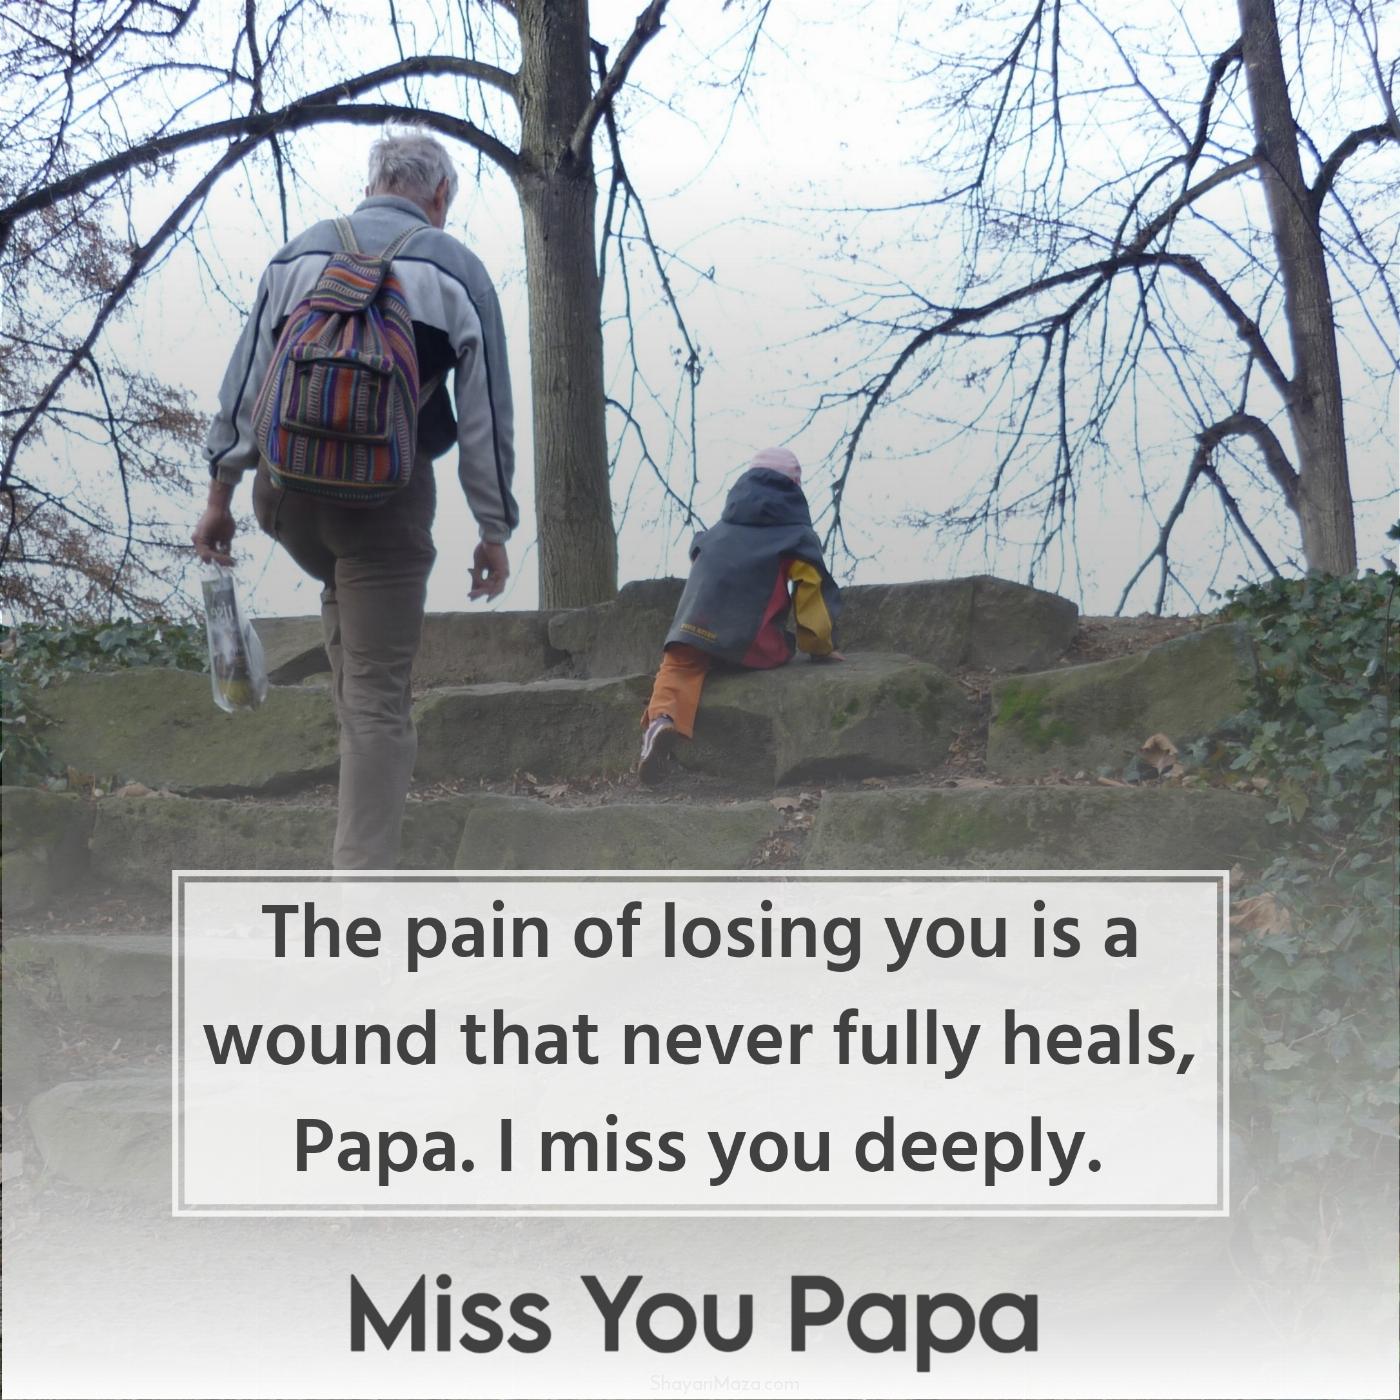 The pain of losing you is a wound that never fully heals Papa